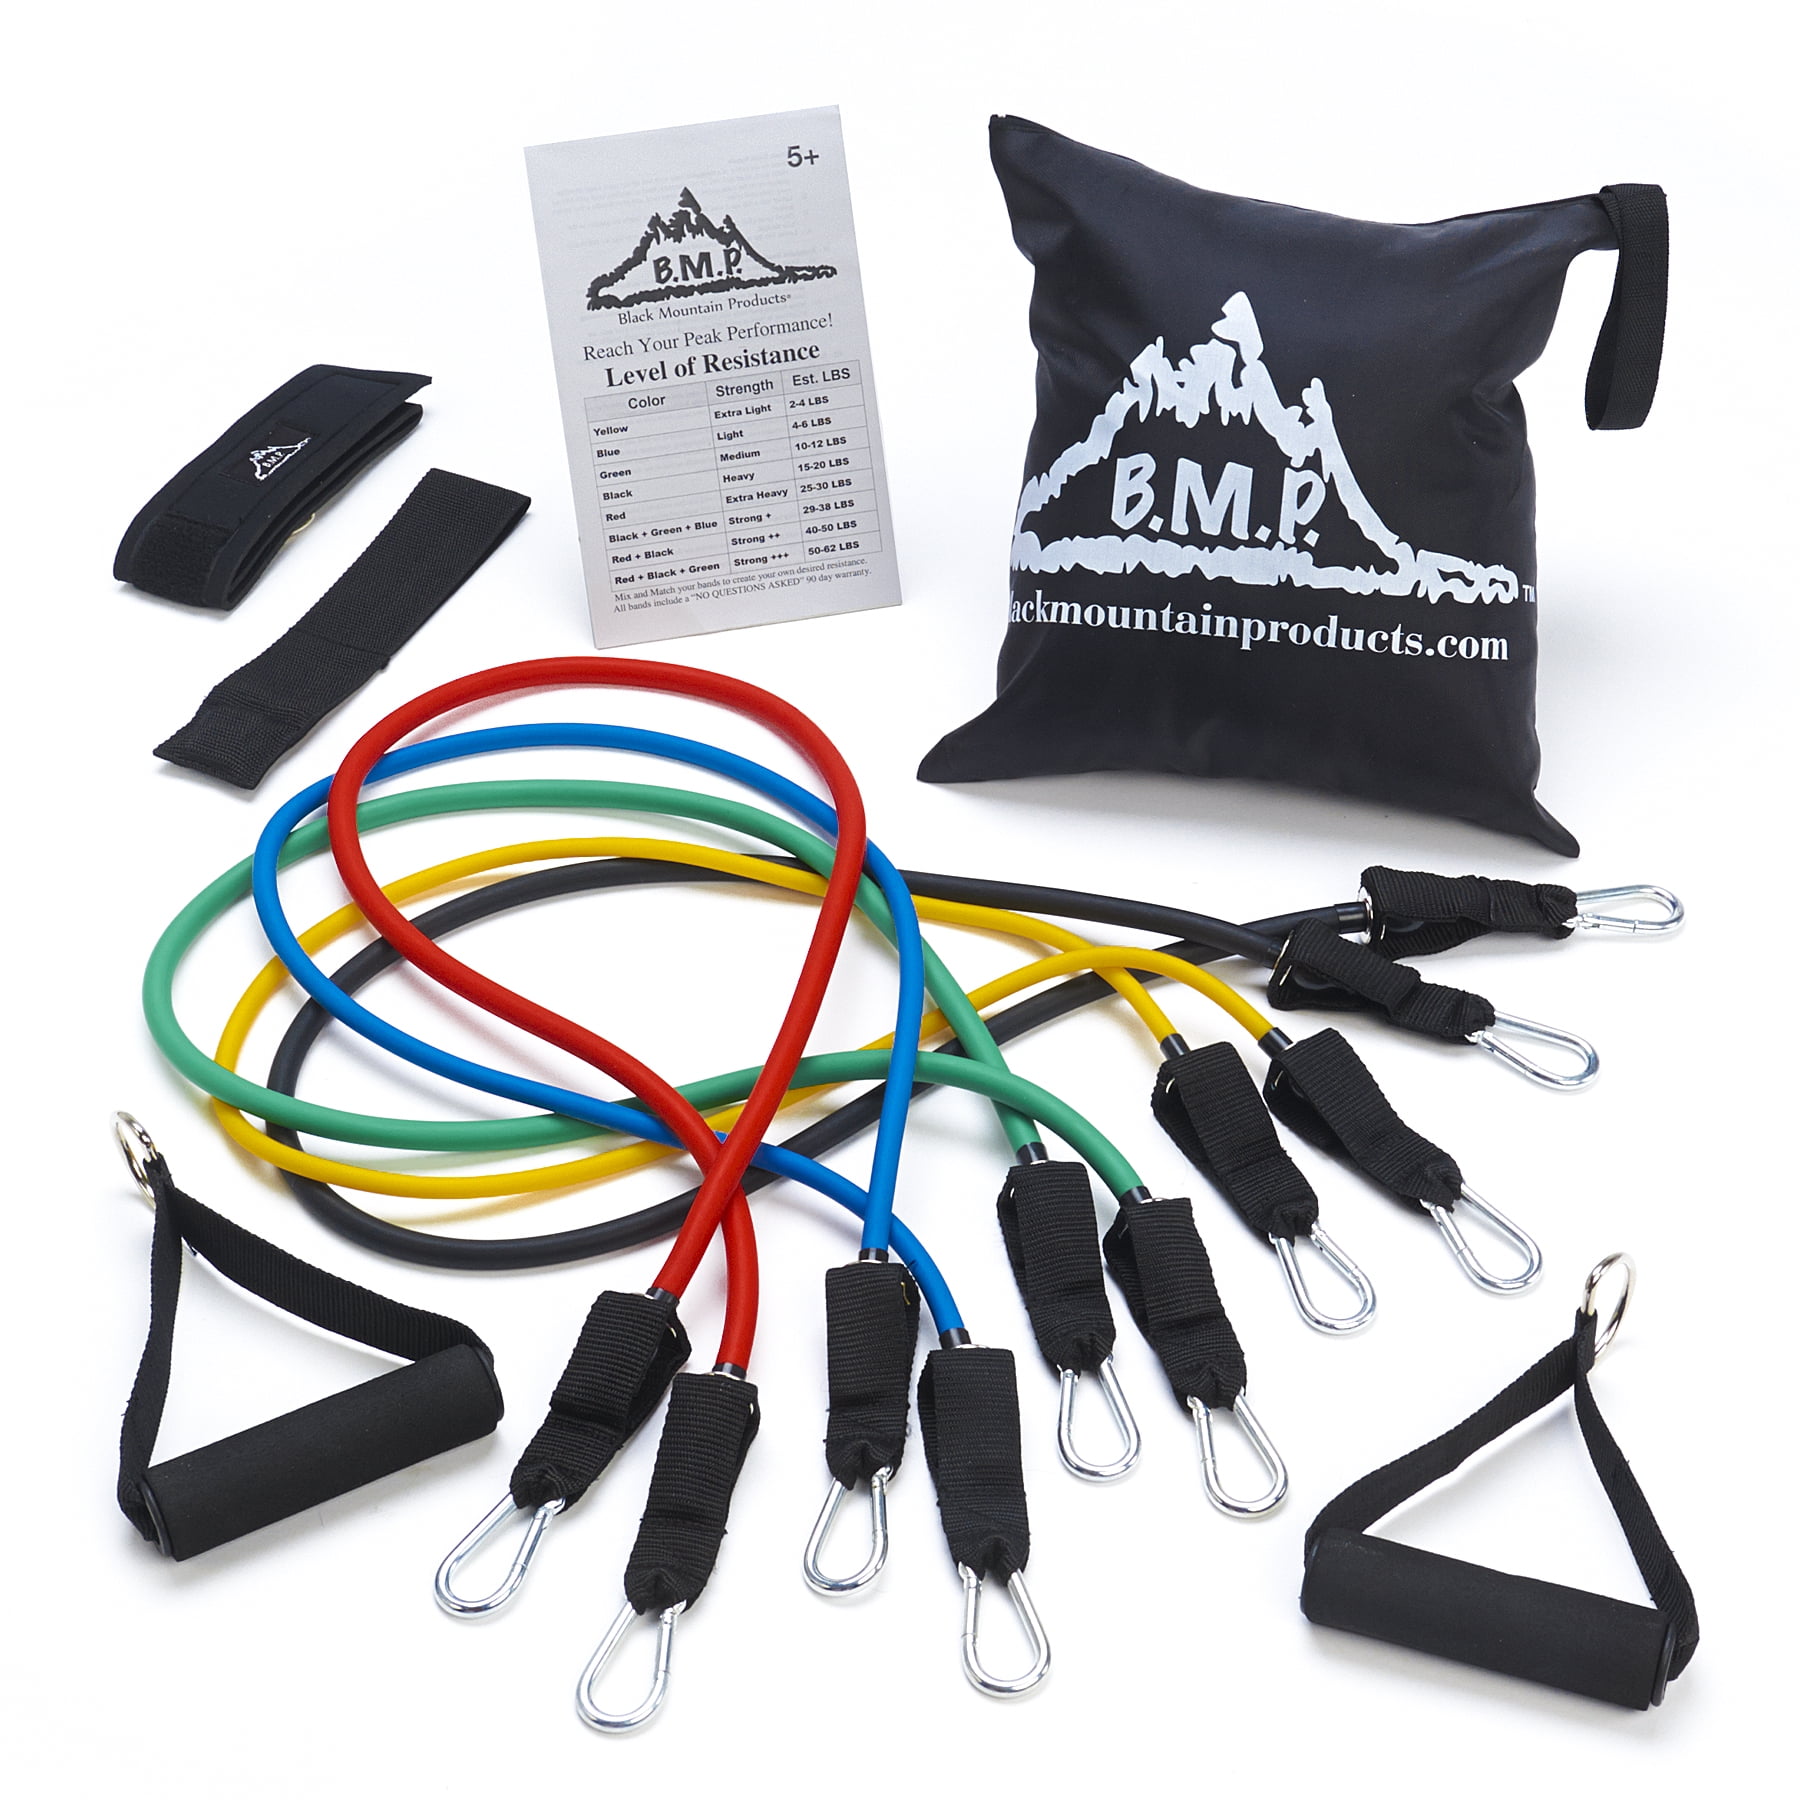 Black Mountain Products Rubber Resistance Band Set with Door Anchor, Ankle  Strap, Exercise Chart, and Resistance Band Carrying Case - Walmart.com